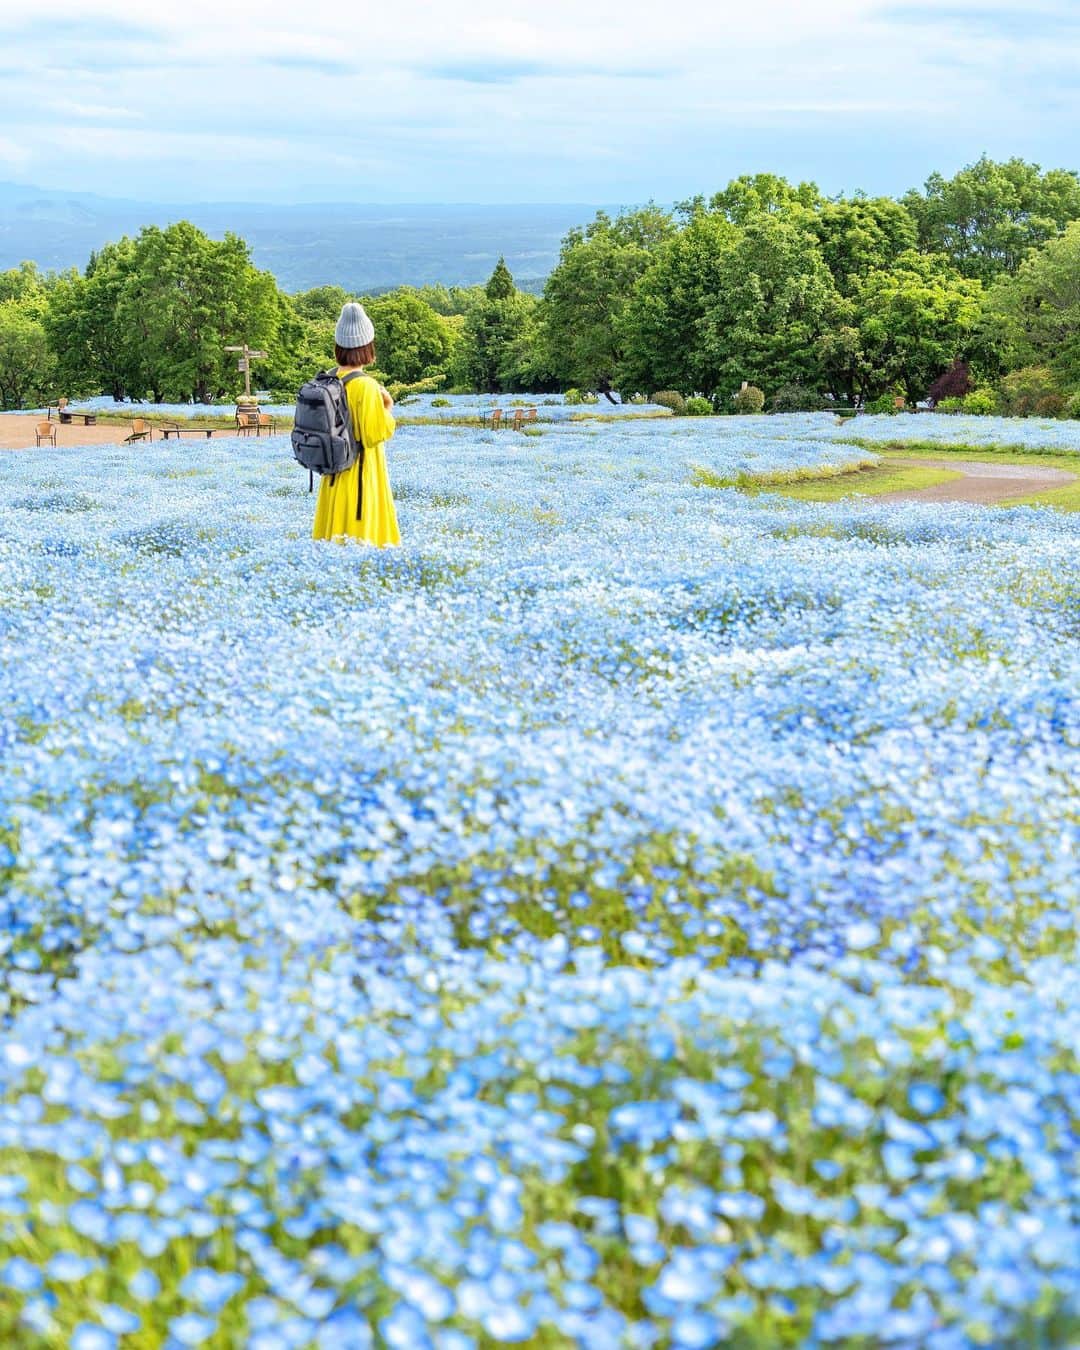 詩歩のインスタグラム：「📷 25th May 2023 📍大分県 くじゅう花公園 /  Kujyu Flower Park ,Oita Japan   大分県くじゅう連山の麓に広がる #くじゅう花公園 。5年ぶりに行ってきました！  標高850mと涼しい気候なので、5月末だったけど青い #ネモフィラ がぎりぎり見頃（さすがにもう終わったかな…）。他のネモフィラ畑は4月中に見頃を迎える場所がほとんどだから、見逃しちゃった人におすすめです💎  カラフルな花たちが寄植えされている「春彩の畑」も、一度見てみたかったから満開の時期に来れてよかった〜🌼  これから夏にかけては、ラベンダーやひまわり畑が咲くみたいです🌻観光的に唯一困ったのは、公共交通機関で一切アクセスできないこと…1日1往復でもいいから、せめてシャトルバスとか出してほしい…！  大分県の投稿はこのタグでまとめています / Posts of this area can be found in this tag.→ #shiho_oita   I visited #Kujyuflowerpark at the foot of Kujyu mountain range in Oita prefecture for the first time in 5 years!　It was the end of May, but the blue #nemophila were just in time to be seen because of the cool climate at 850m altitude. Most of the other nemophila fields are at their best in April, so this is a good place to visit if you missed them!　I'm glad I came because I've always wanted to see the "Spring Color Field" in the third photo, where various colorful flowers are planted!　It says that lavender and sunflower fields will be in bloom from now on through the summer.  Thank you! @isle_photograph  ©︎Shiho/詩歩」